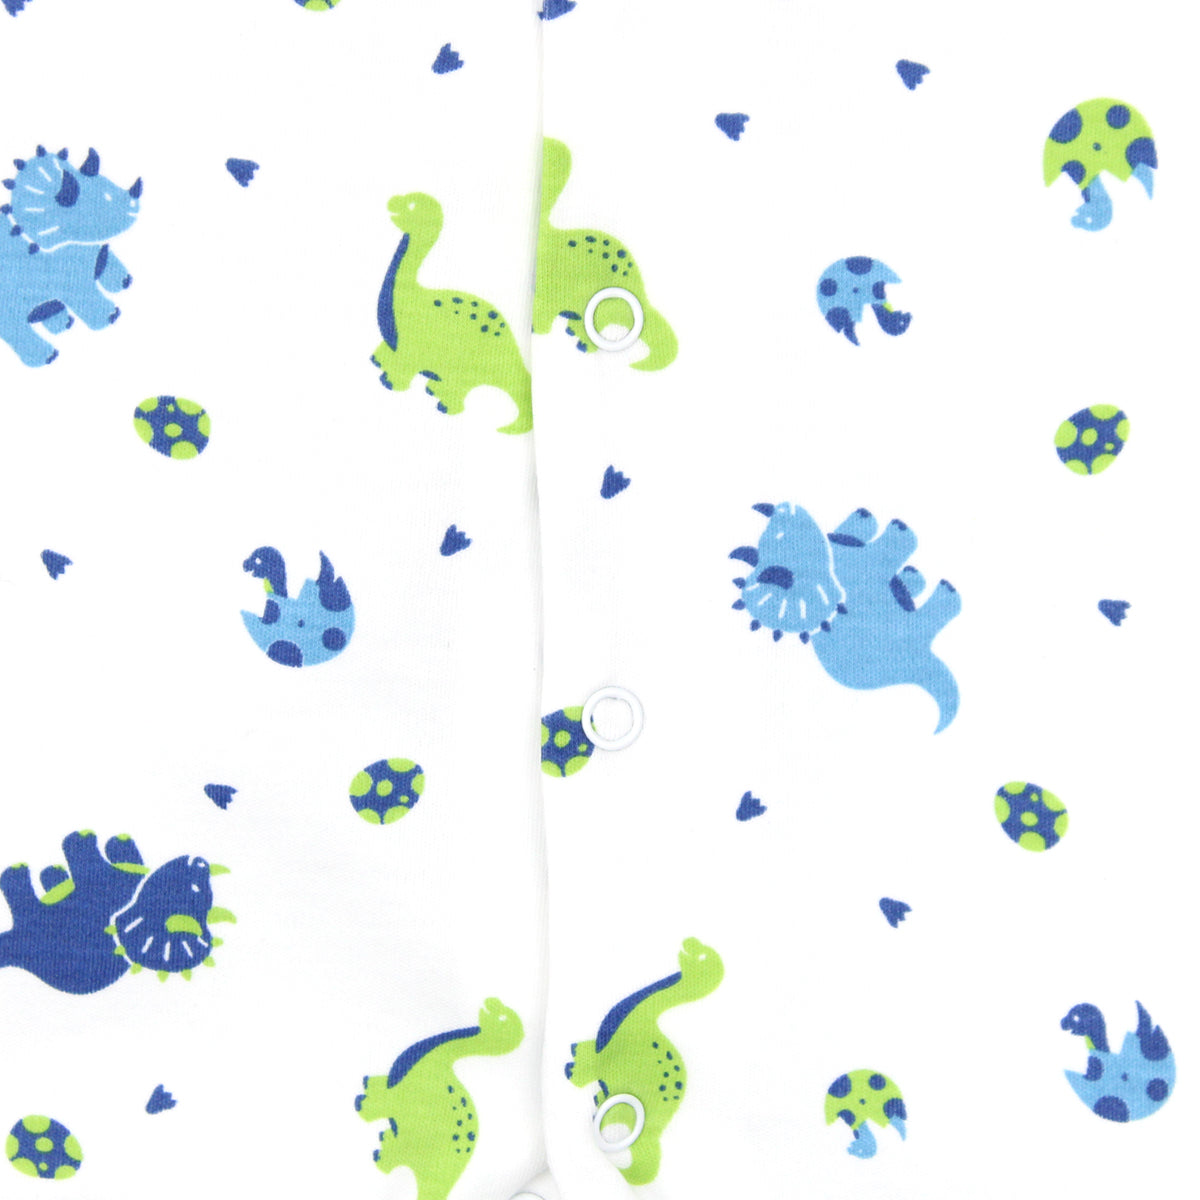 Baby Dinosaurs Printed Coverall | Baby Boy